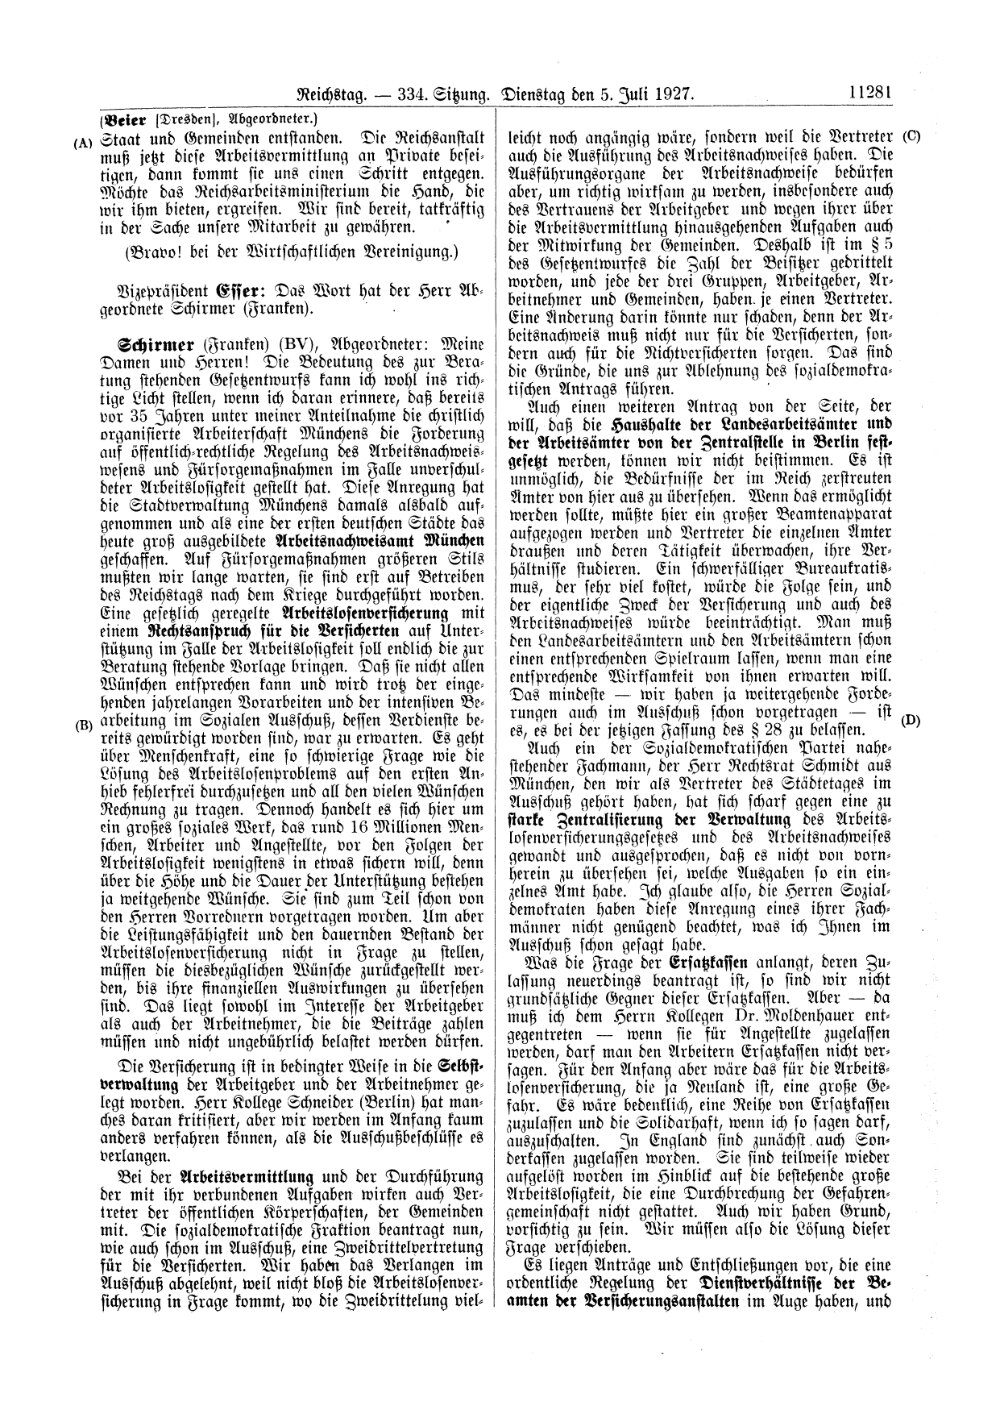 Scan of page 11281